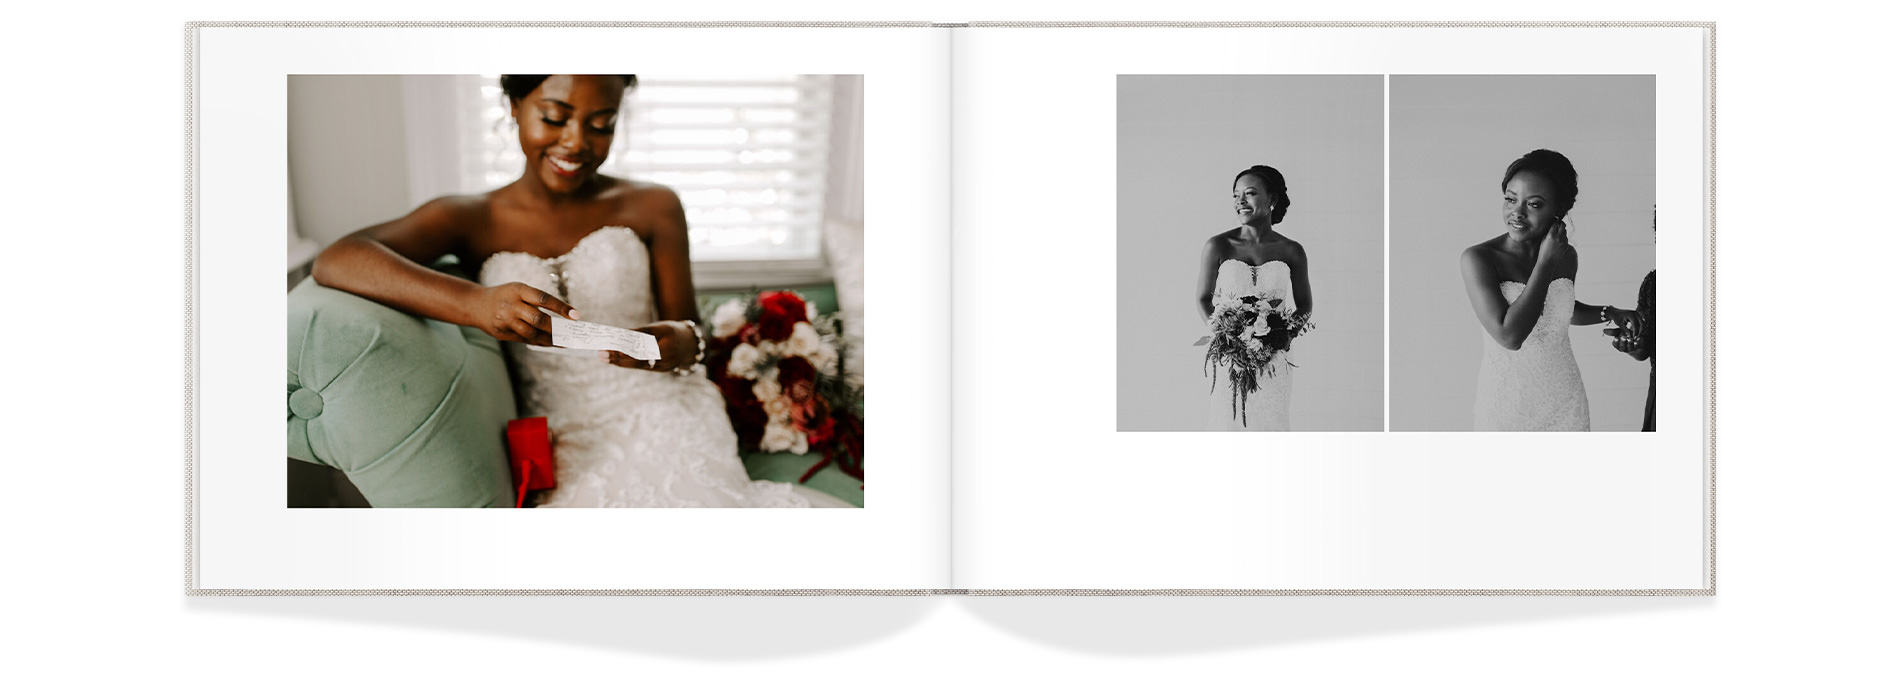 Wedding photo album with images of a bride getting ready